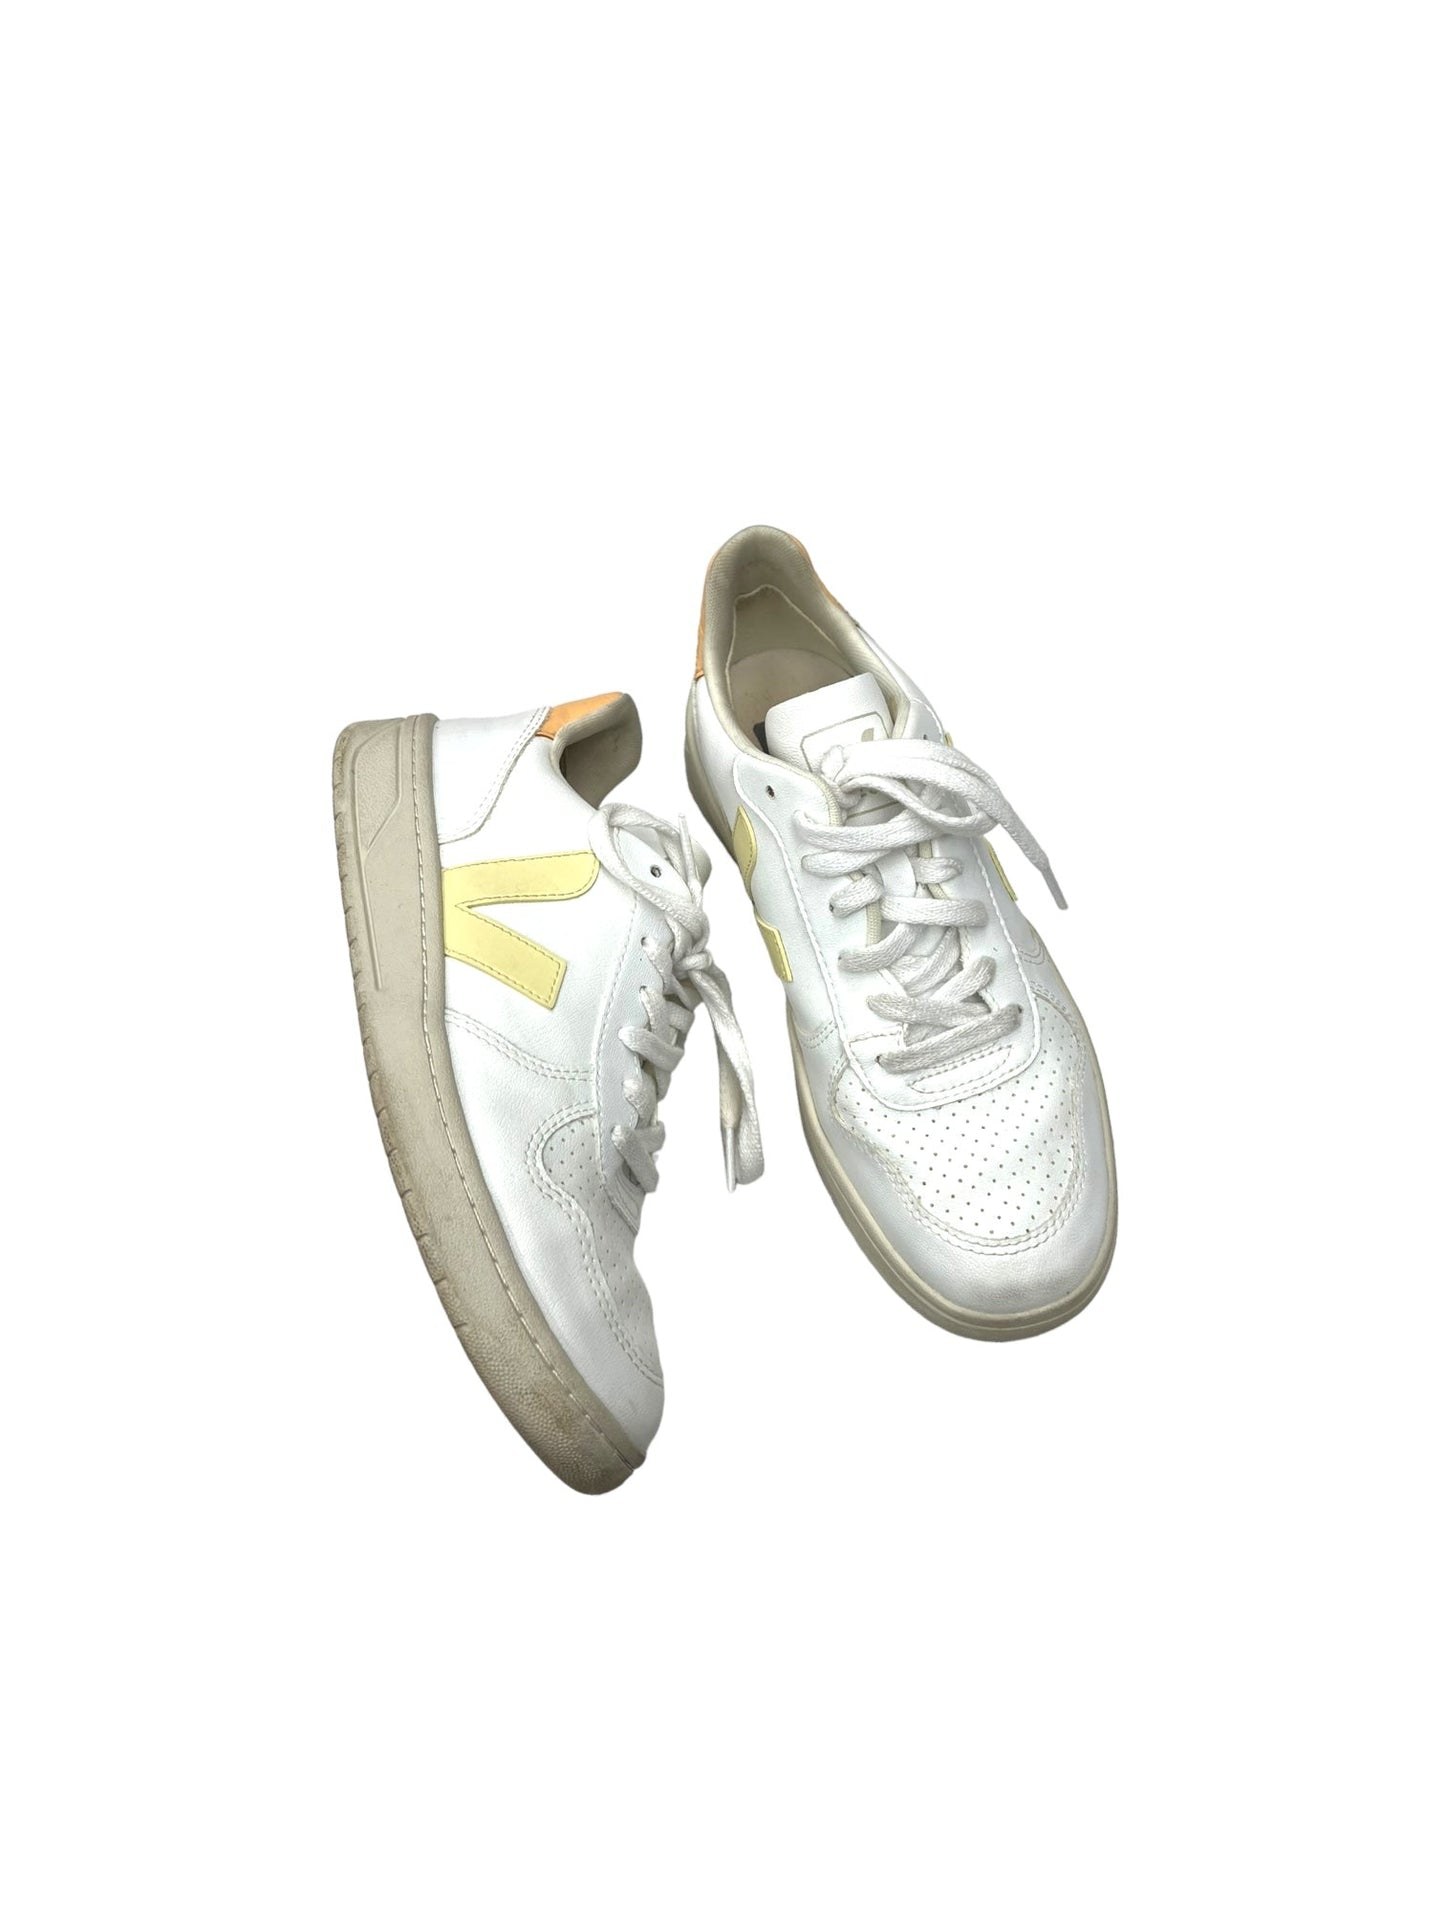 White & Yellow Shoes Sneakers VEJA, Size 8